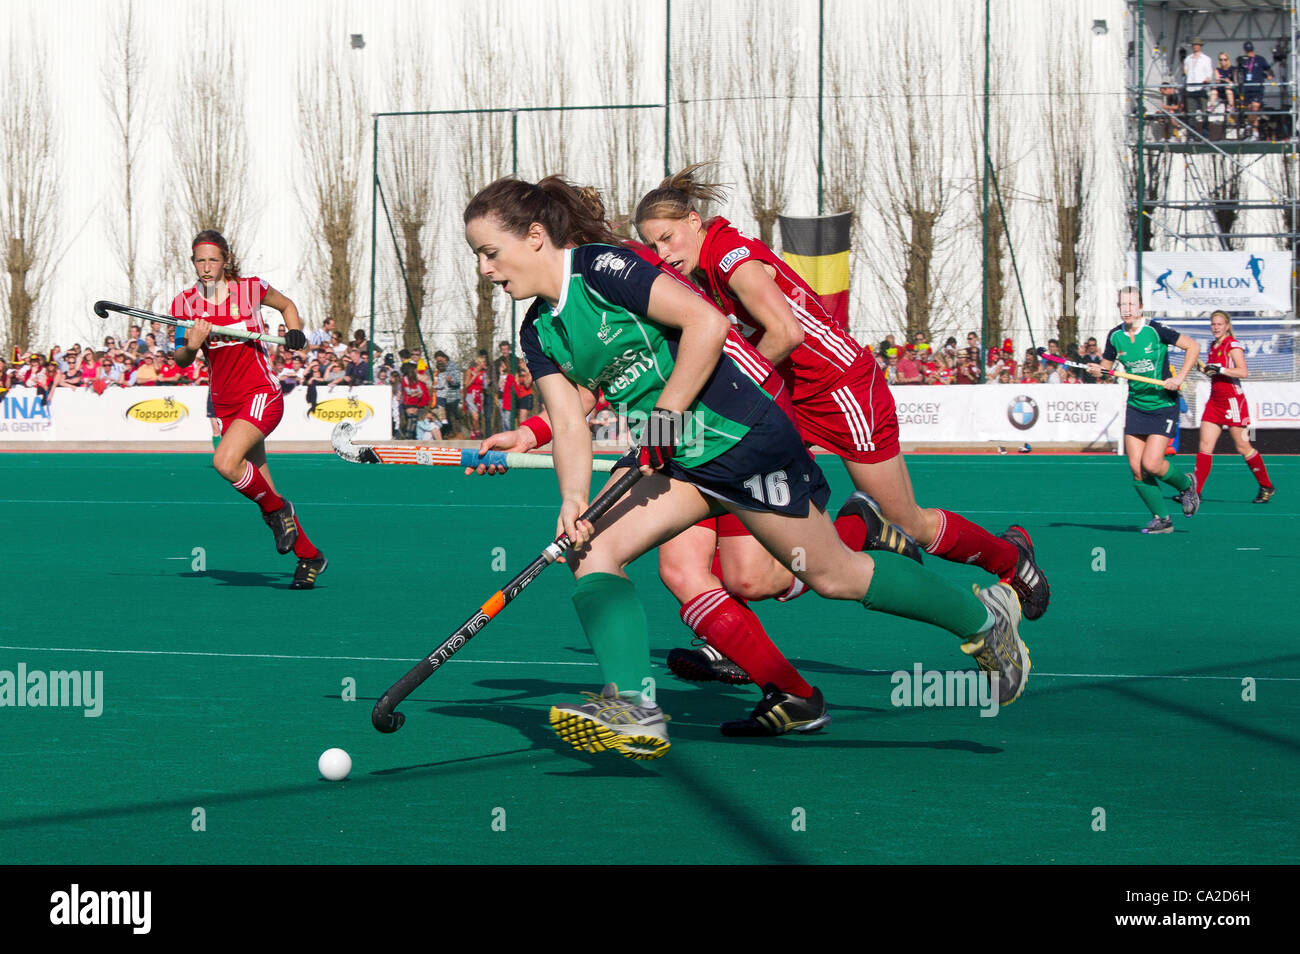 25.03.2012 - Kontich, Belgium - Pictured at the final of the Womens Hockey Olympic Qualifying Tournament between Ireland and Belgium. Aine Connery (16) for Ireland in full flight. Stock Photo